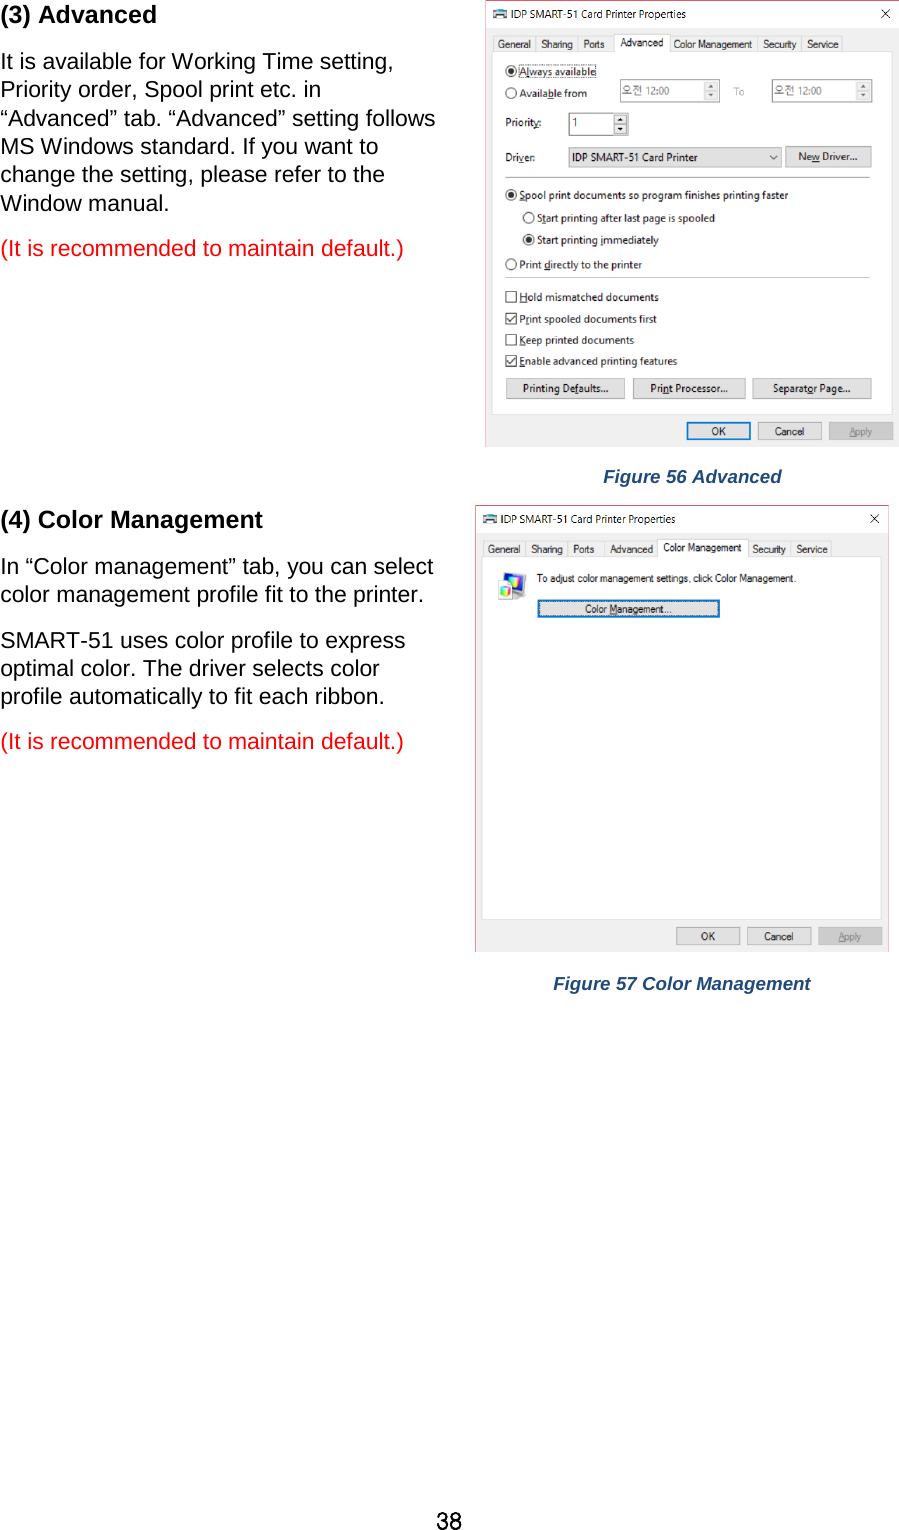 38 (3) Advanced It is available for Working Time setting, Priority order, Spool print etc. in “Advanced” tab. “Advanced” setting follows MS Windows standard. If you want to change the setting, please refer to the Window manual. (It is recommended to maintain default.)   Figure 56 Advanced (4) Color Management In “Color management” tab, you can select color management profile fit to the printer. SMART-51 uses color profile to express optimal color. The driver selects color profile automatically to fit each ribbon. (It is recommended to maintain default.)     Figure 57 Color Management  